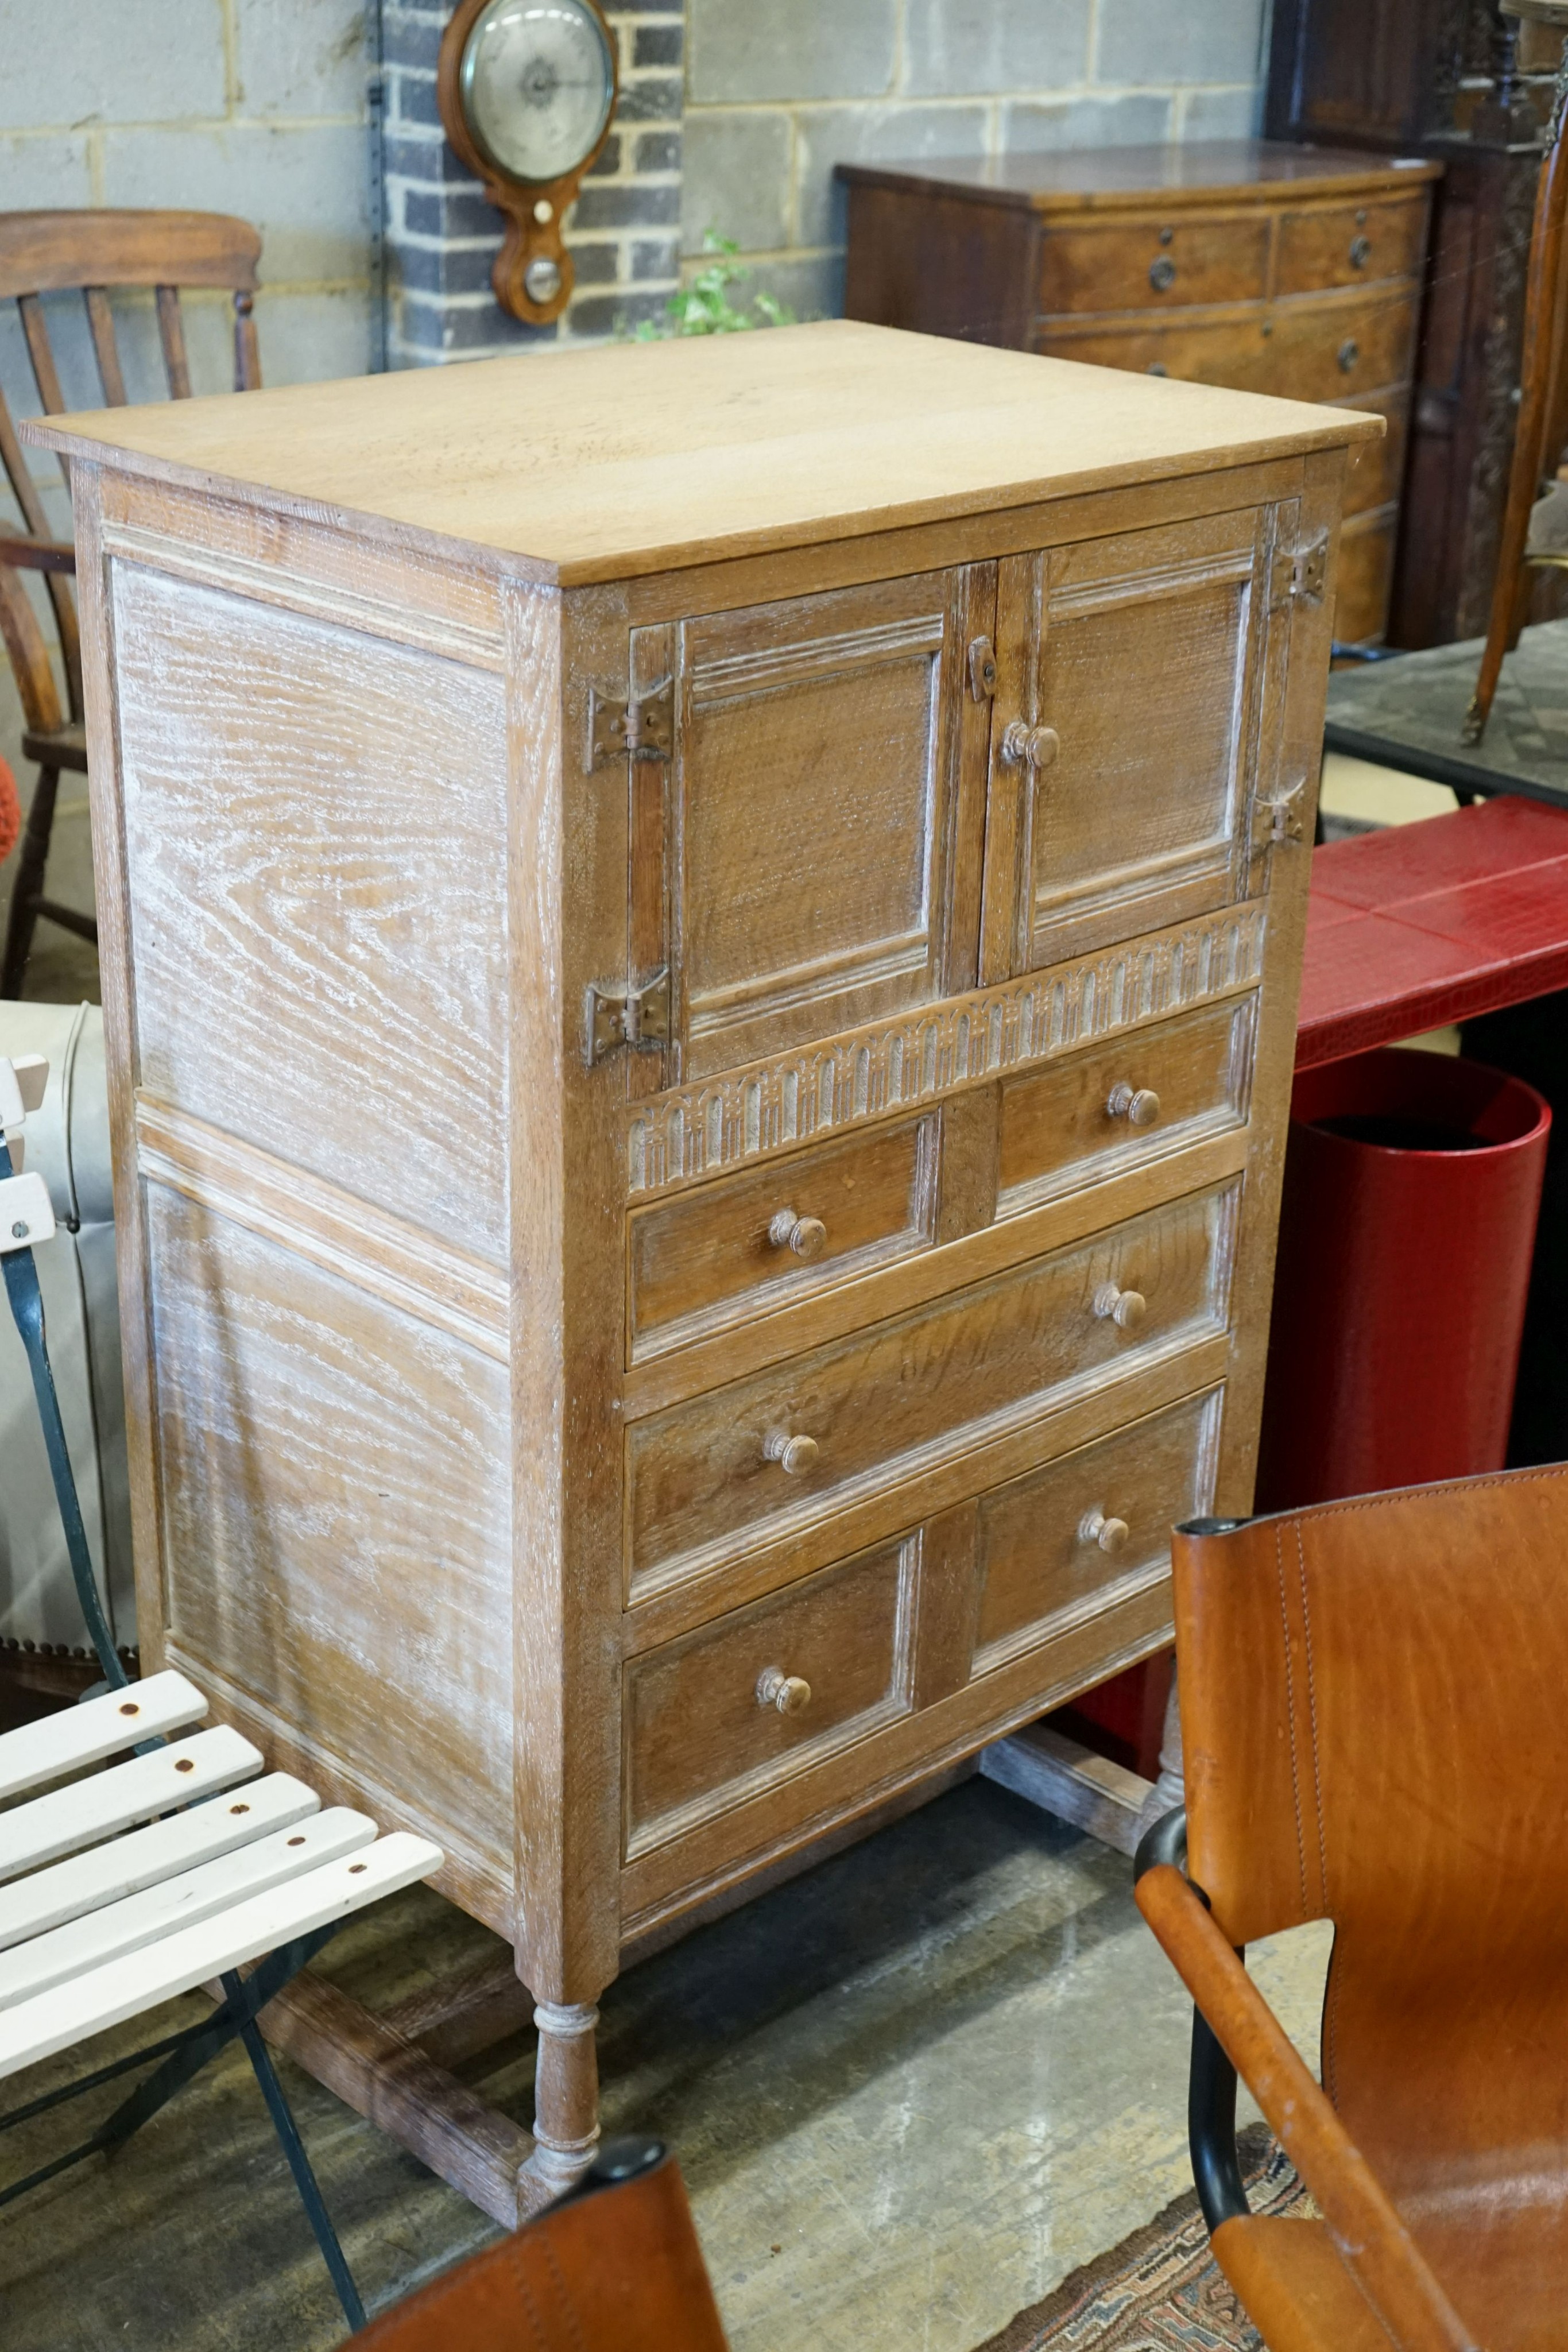 A Heals limed oak chest of drawers, dressing table, width 114cm, depth 51cm, height 135cm and a stool